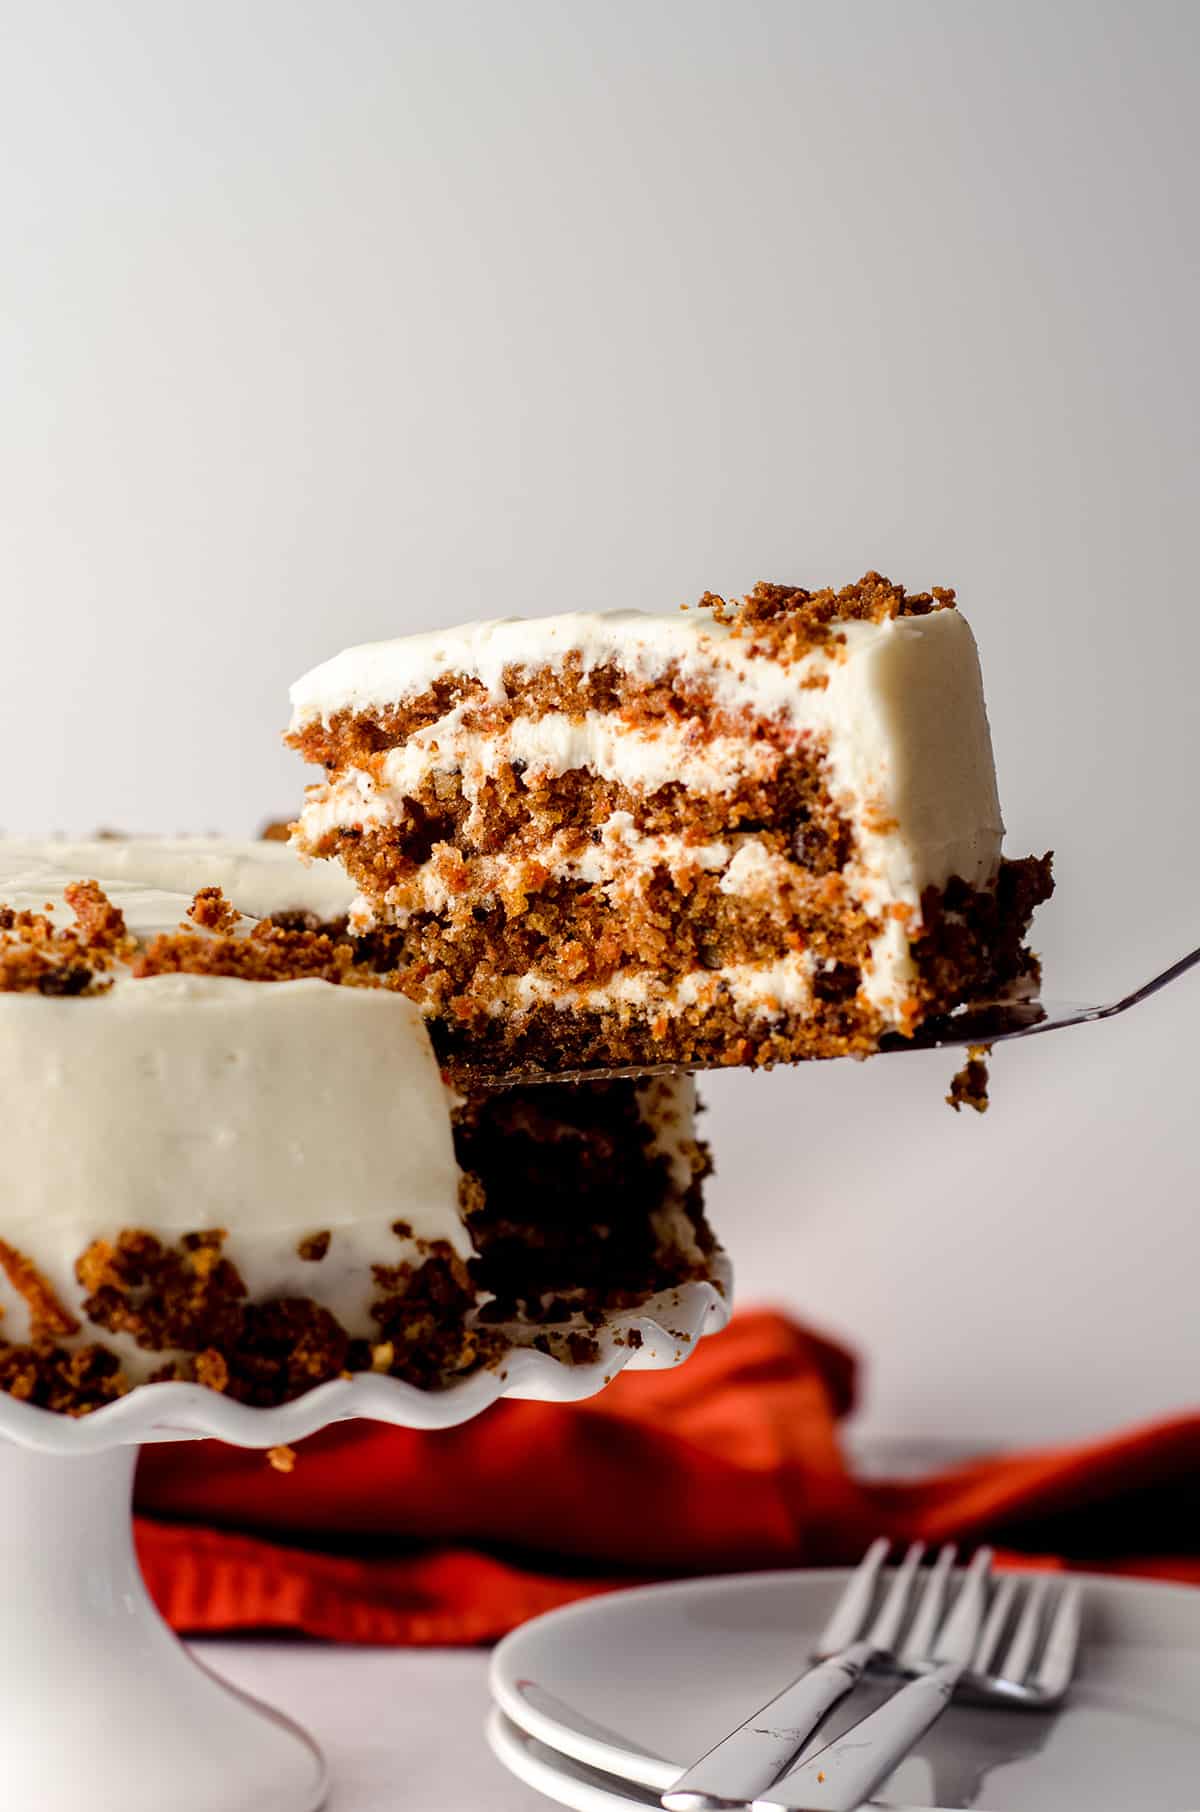 a slice of carrot walnut cake being lifted out from the cake to serve